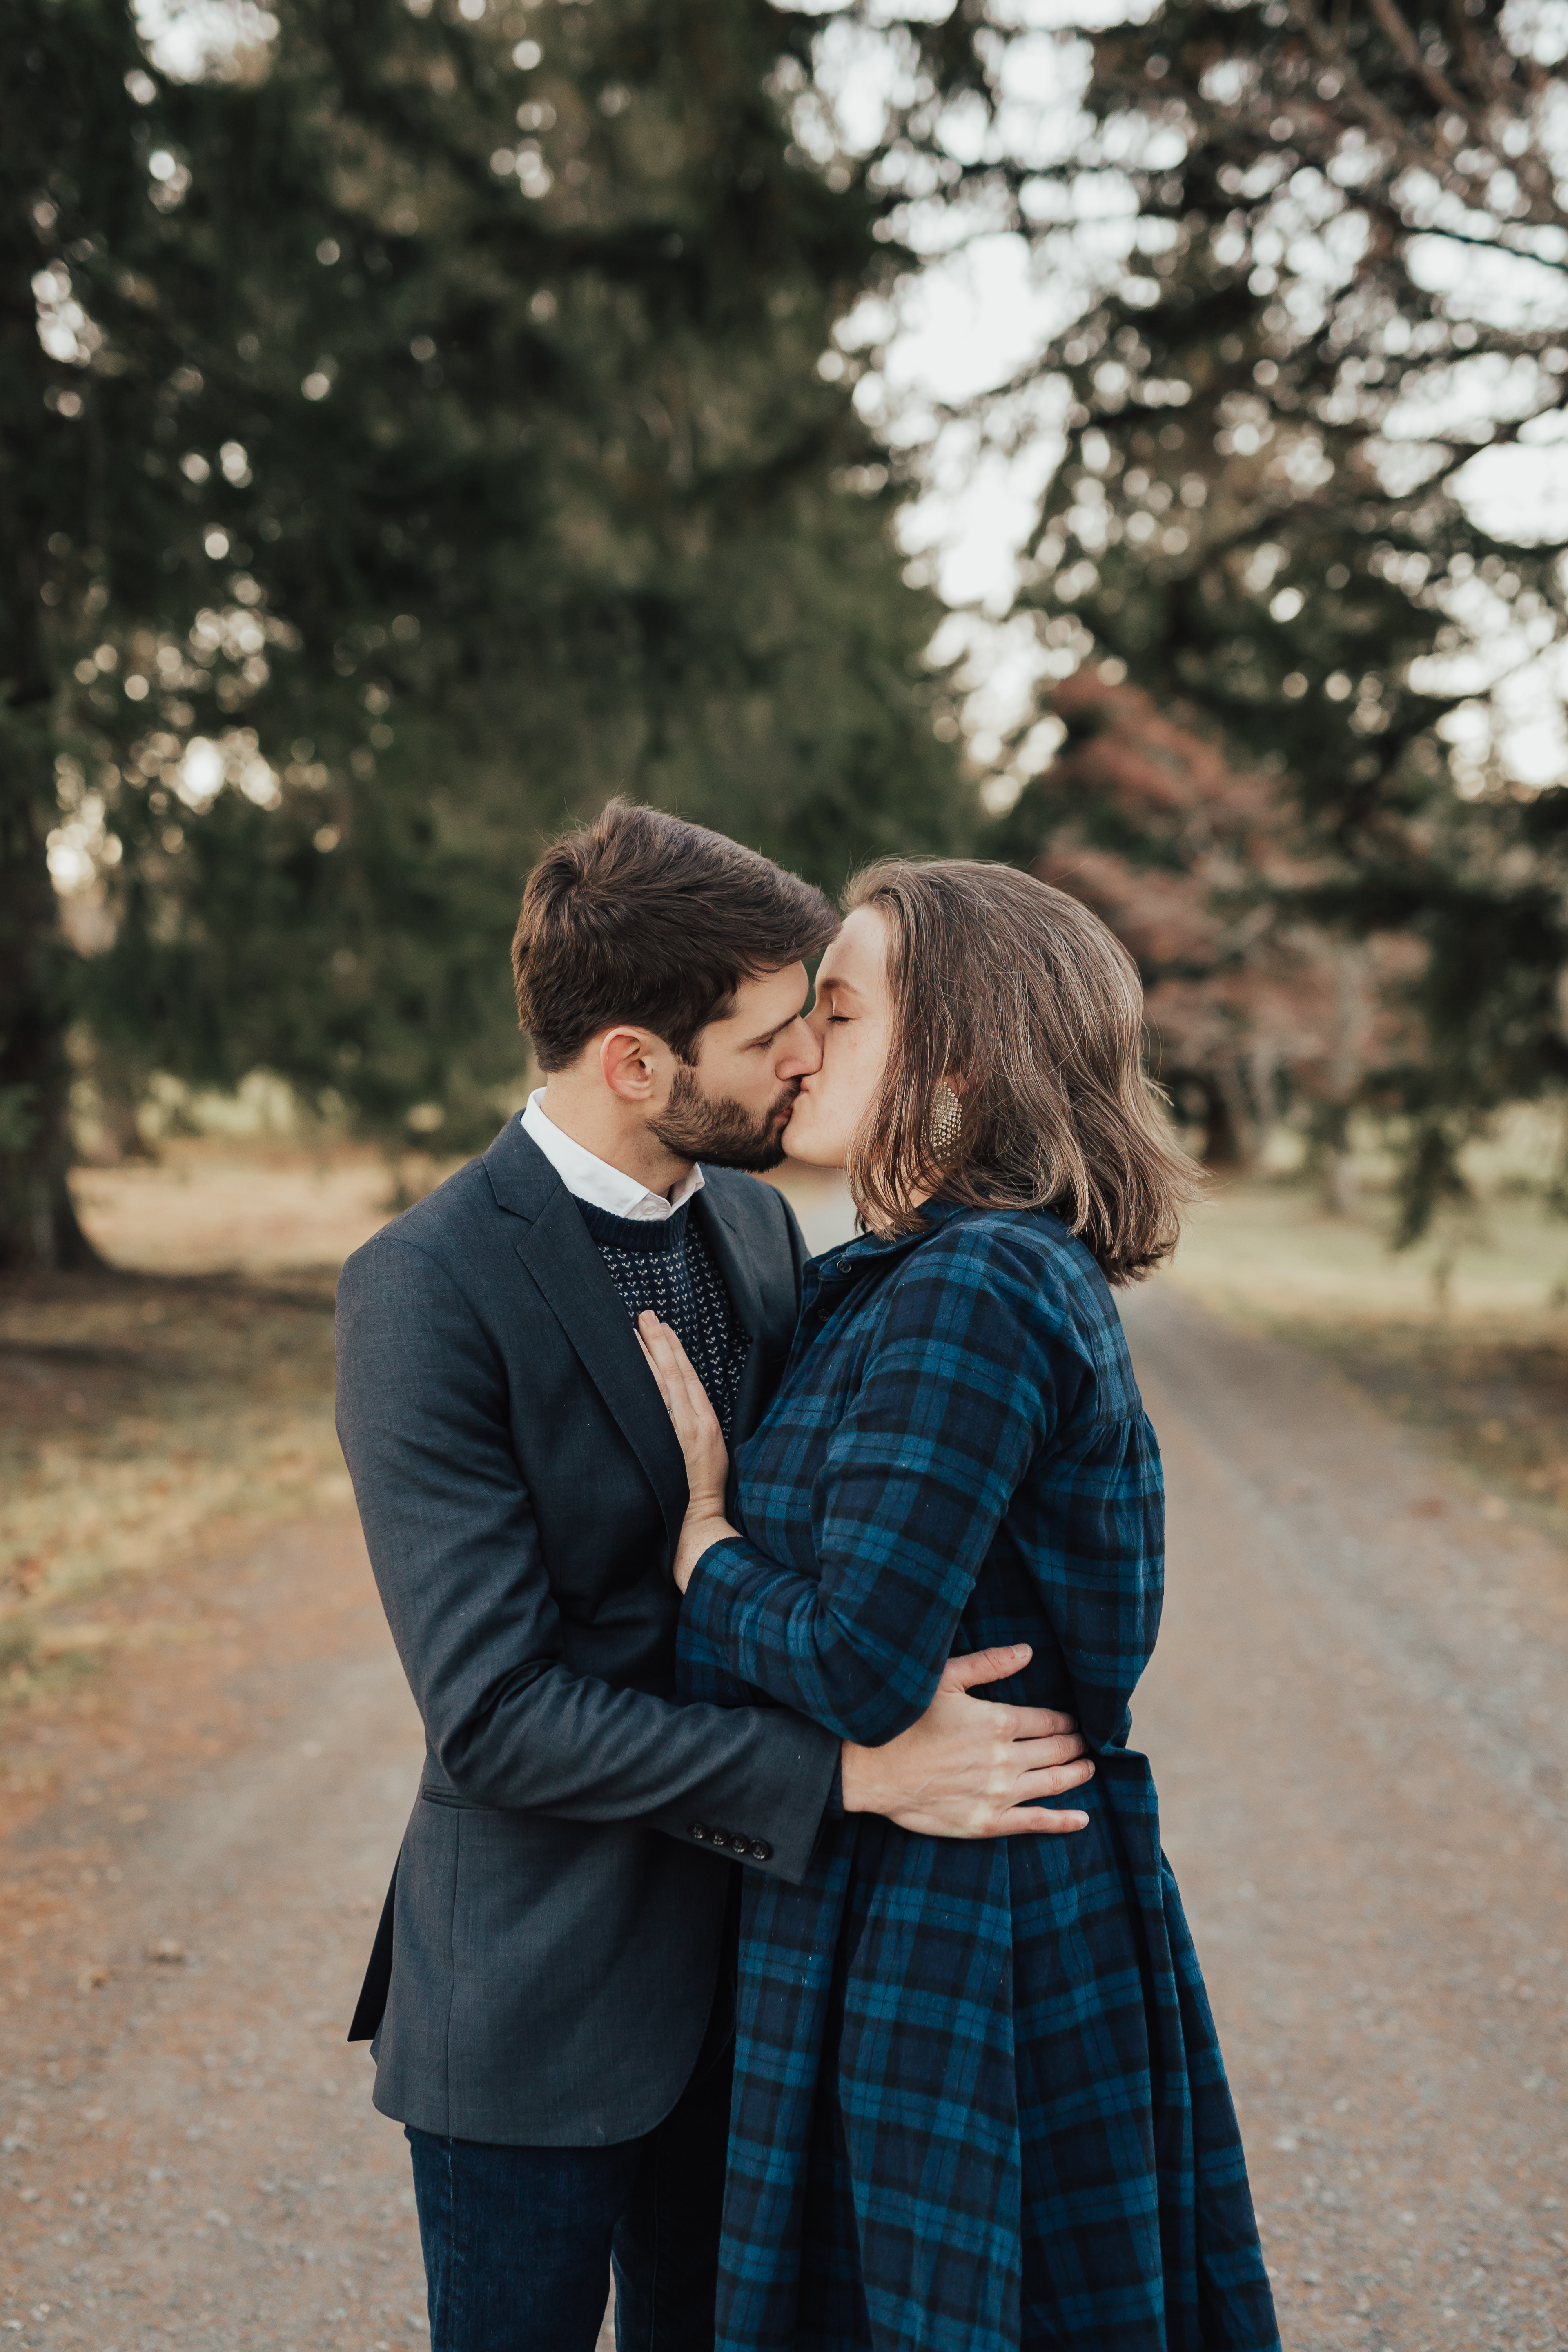 Couple kissing each other on a dirt road